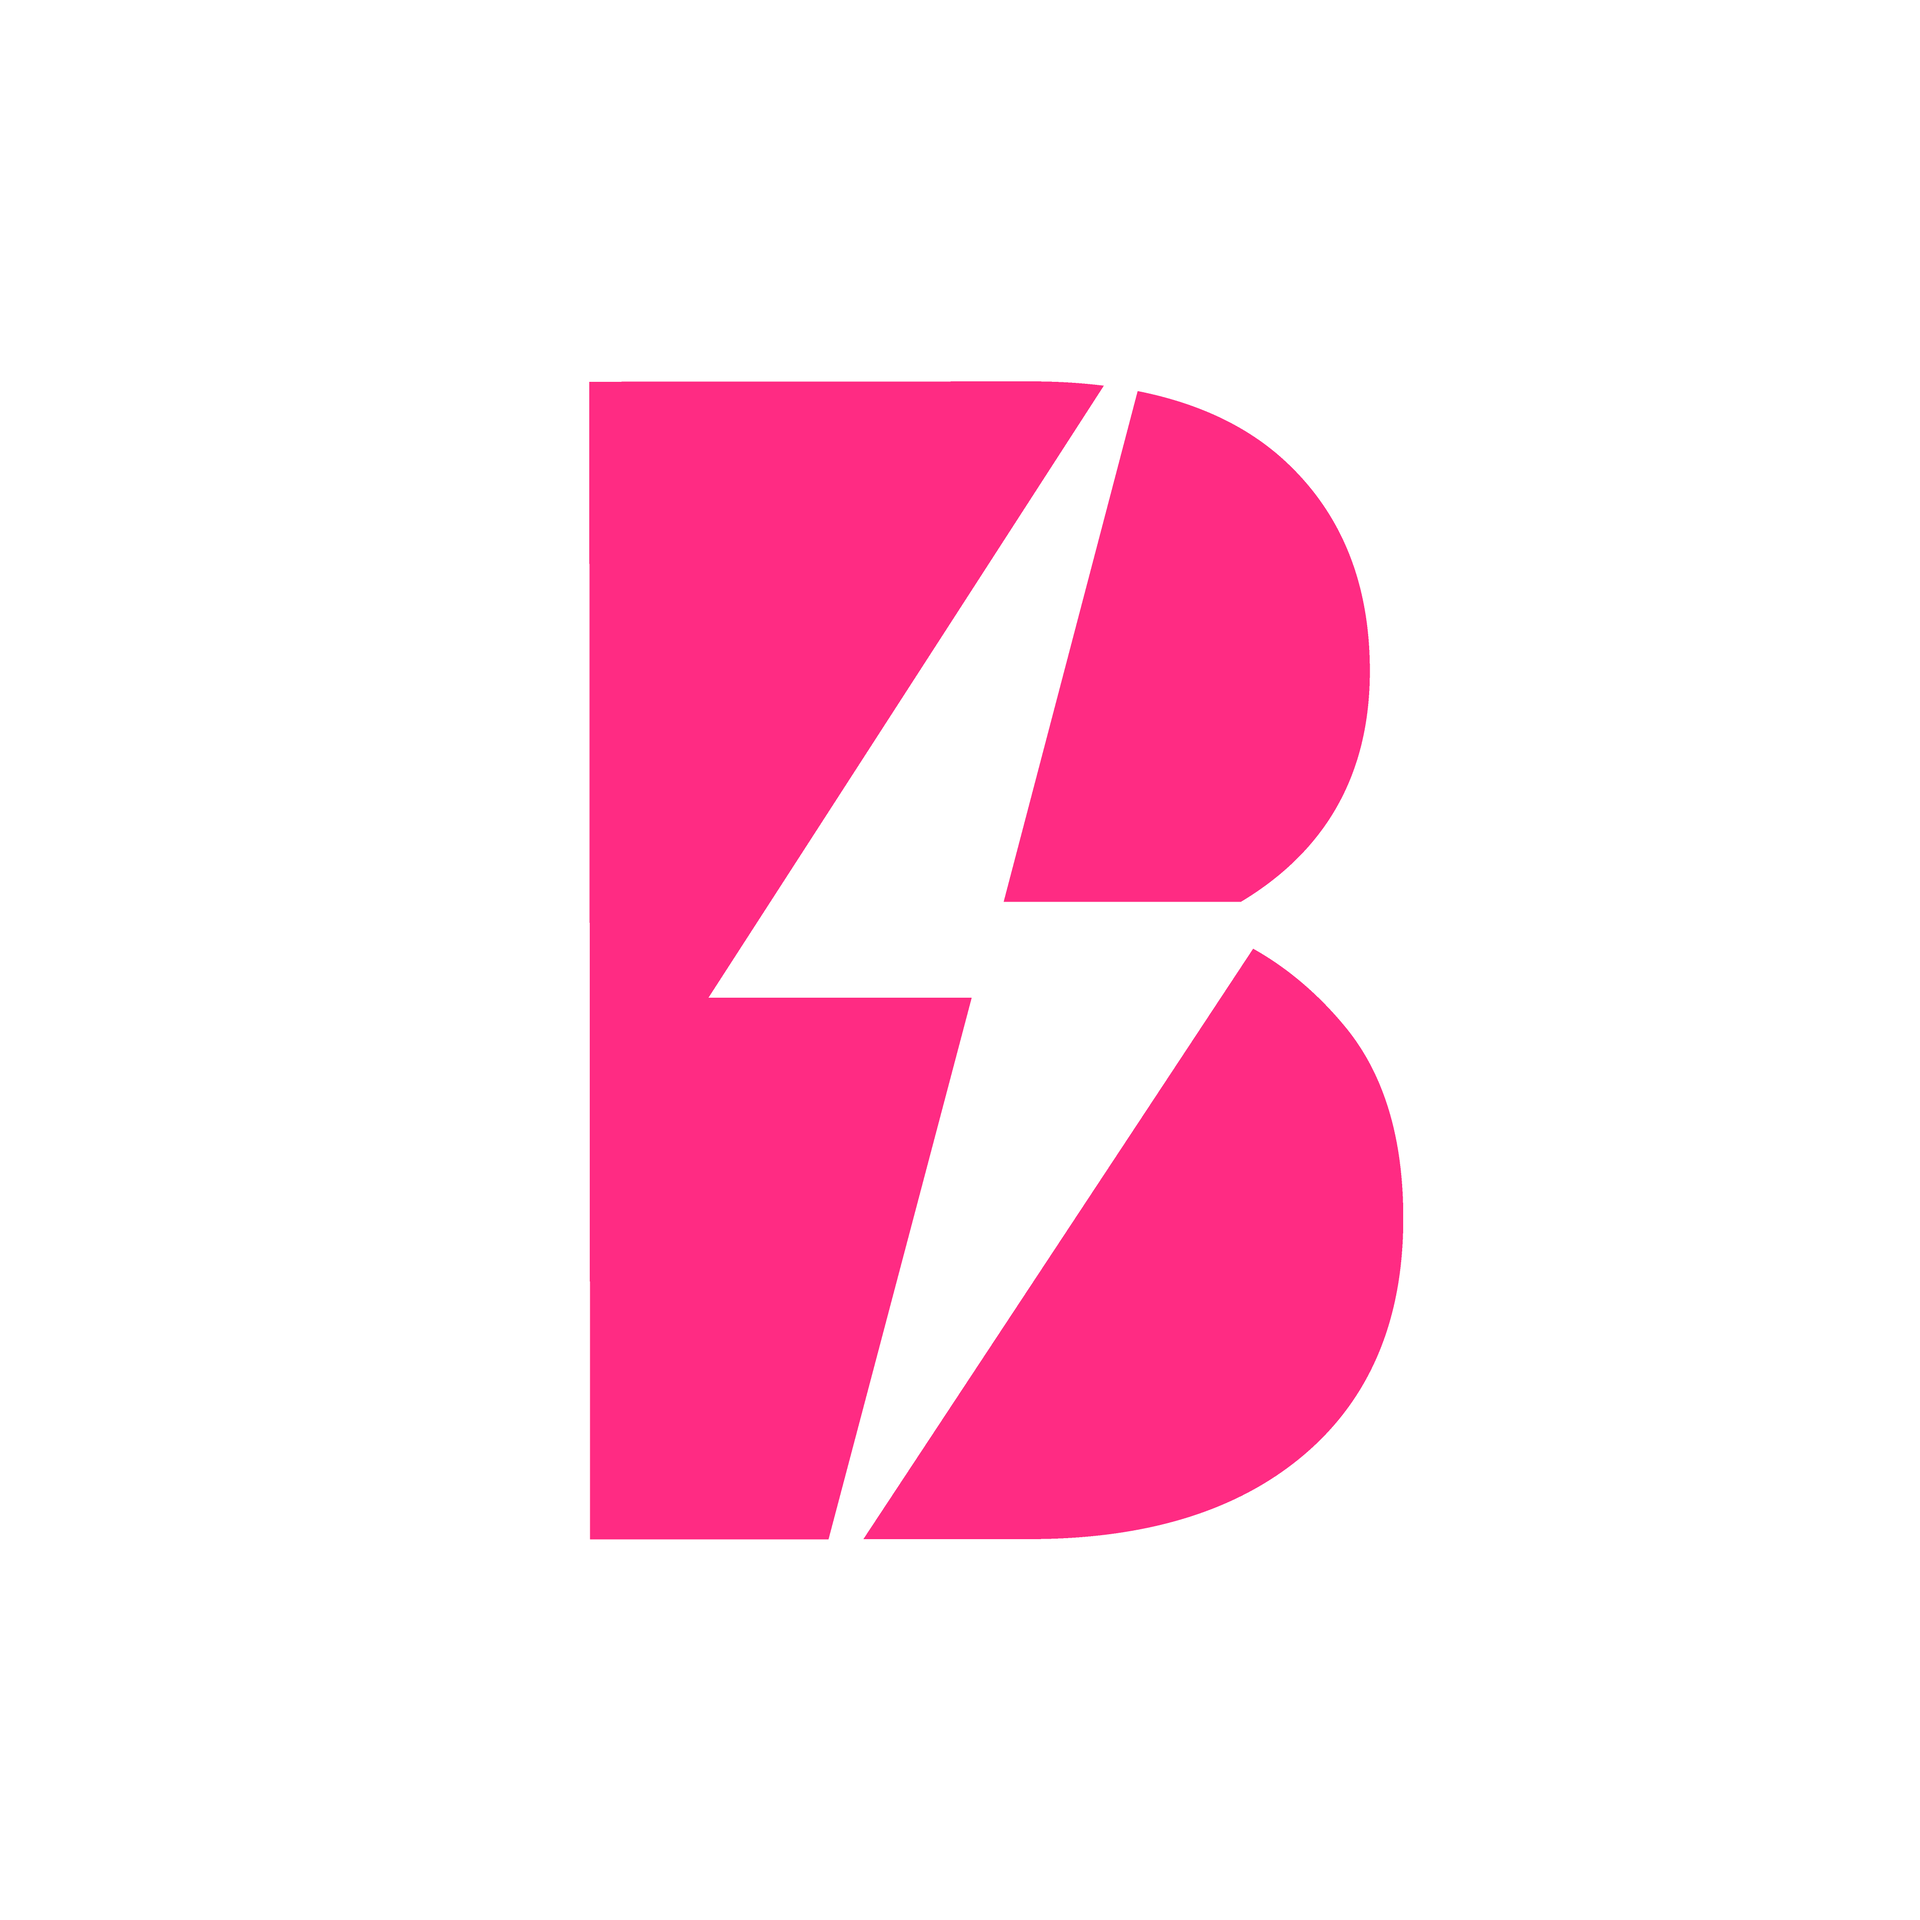 B for Business Sparks